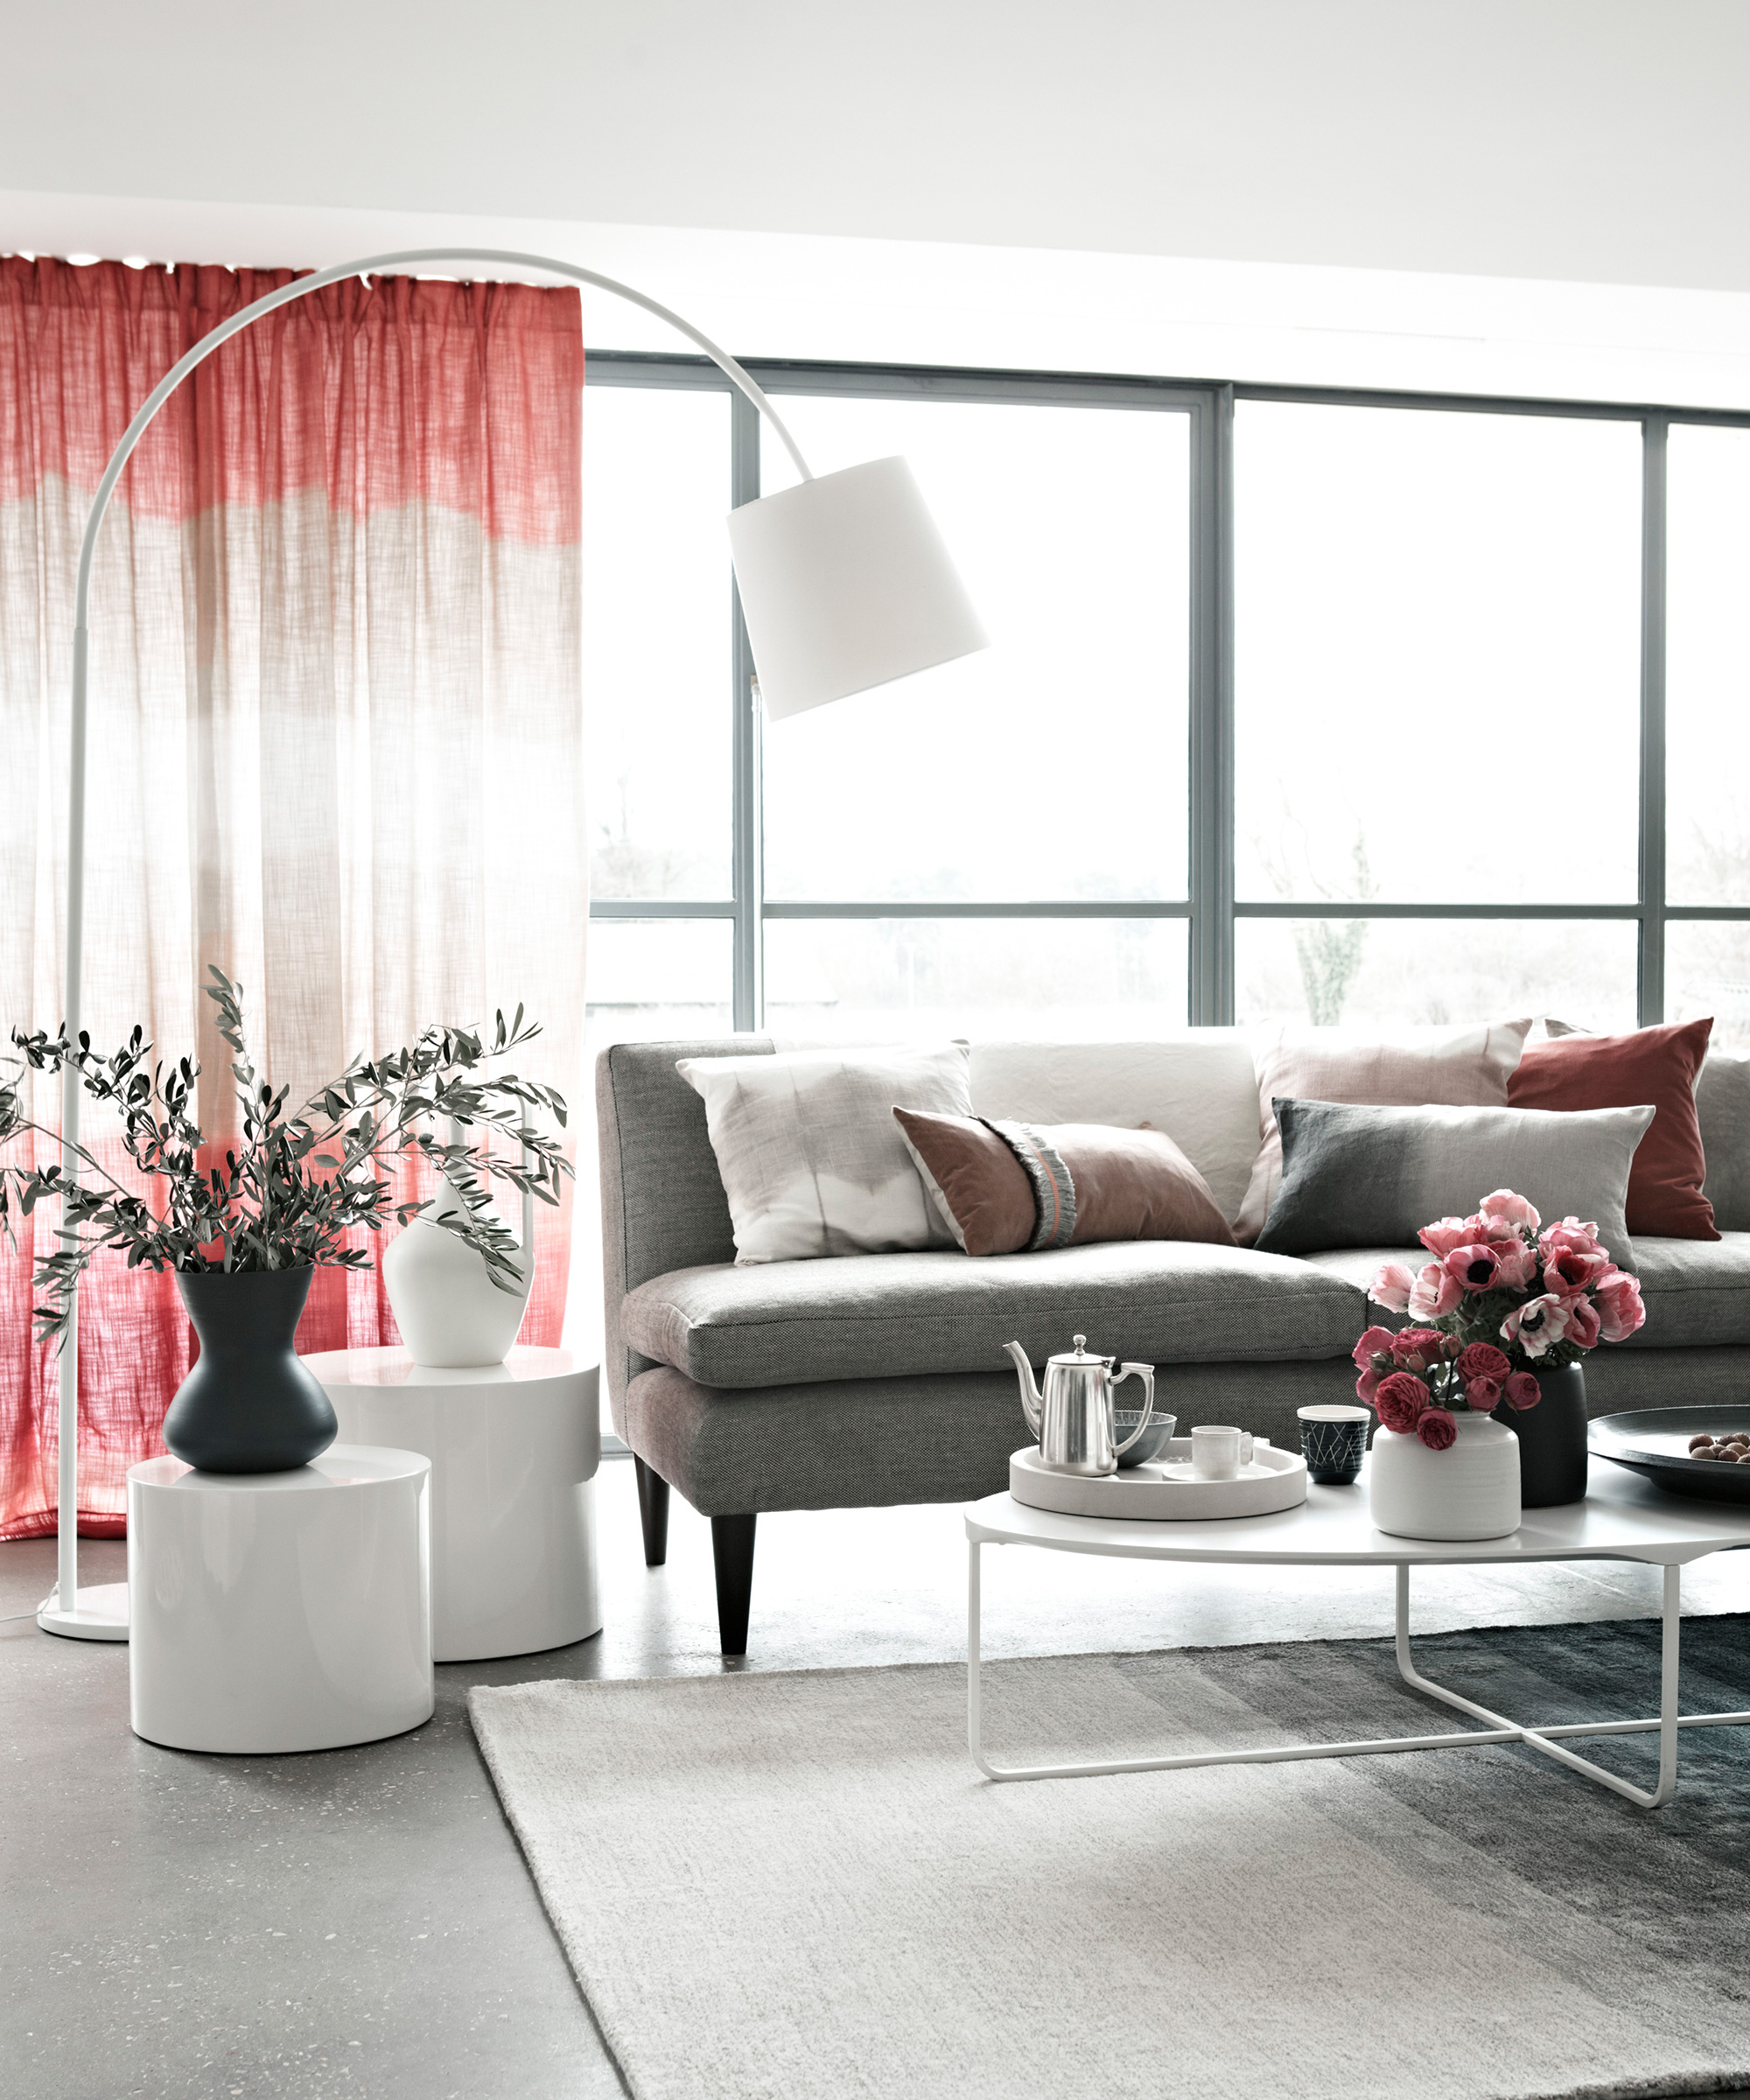 Grey living room ideas illustrated in a pale grey scheme with white coffee tables and pink drapes.